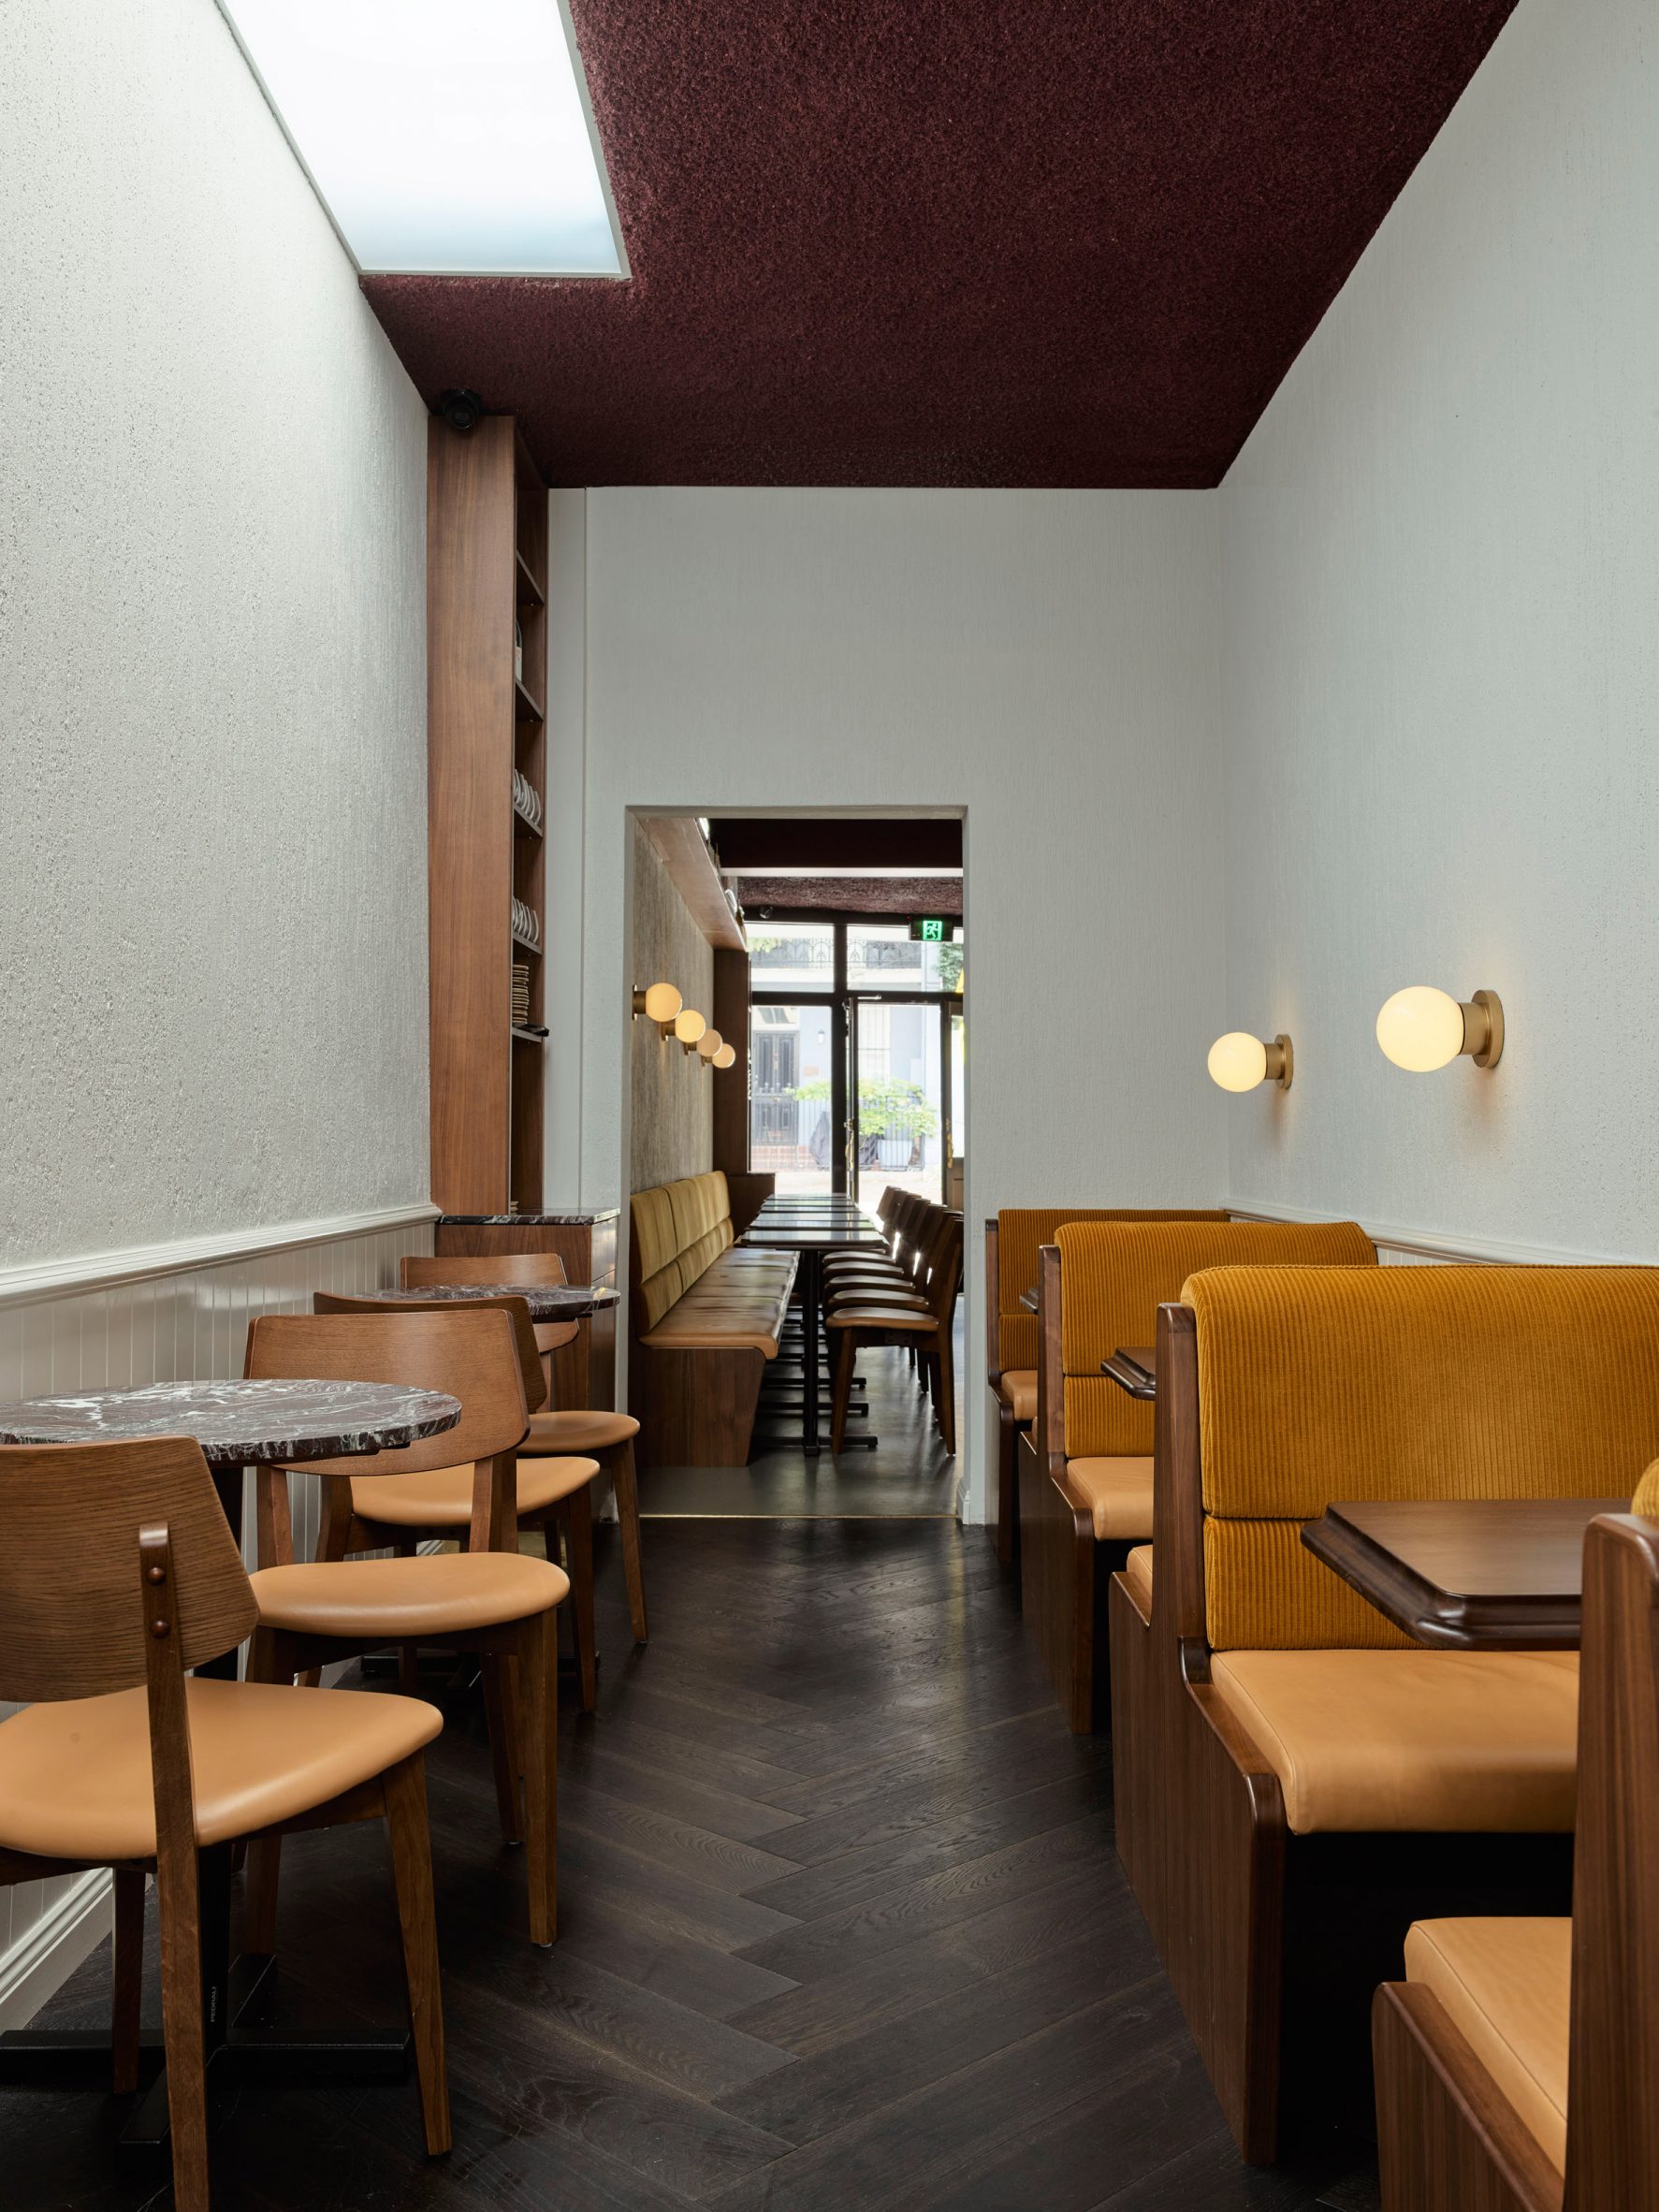 Rear living room with seating at Jane's Bar in Surry Hills, Sydney